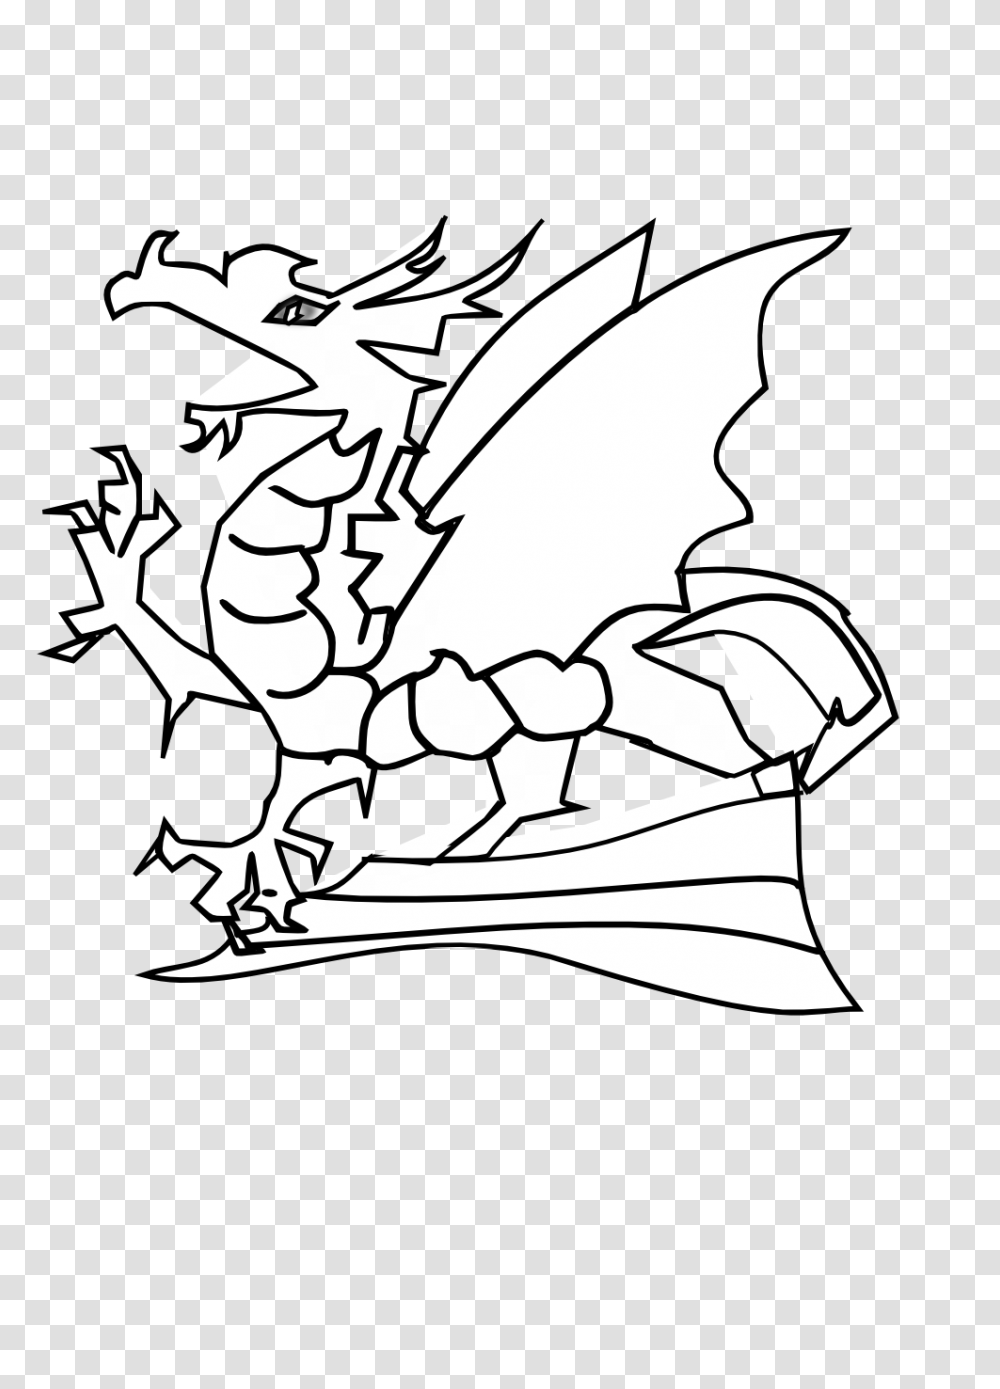 Cute Dragon Black And White Colouring Template Dragon Black And White Template Of A Dragon, Art, Clothing, Apparel, Drawing Transparent Png